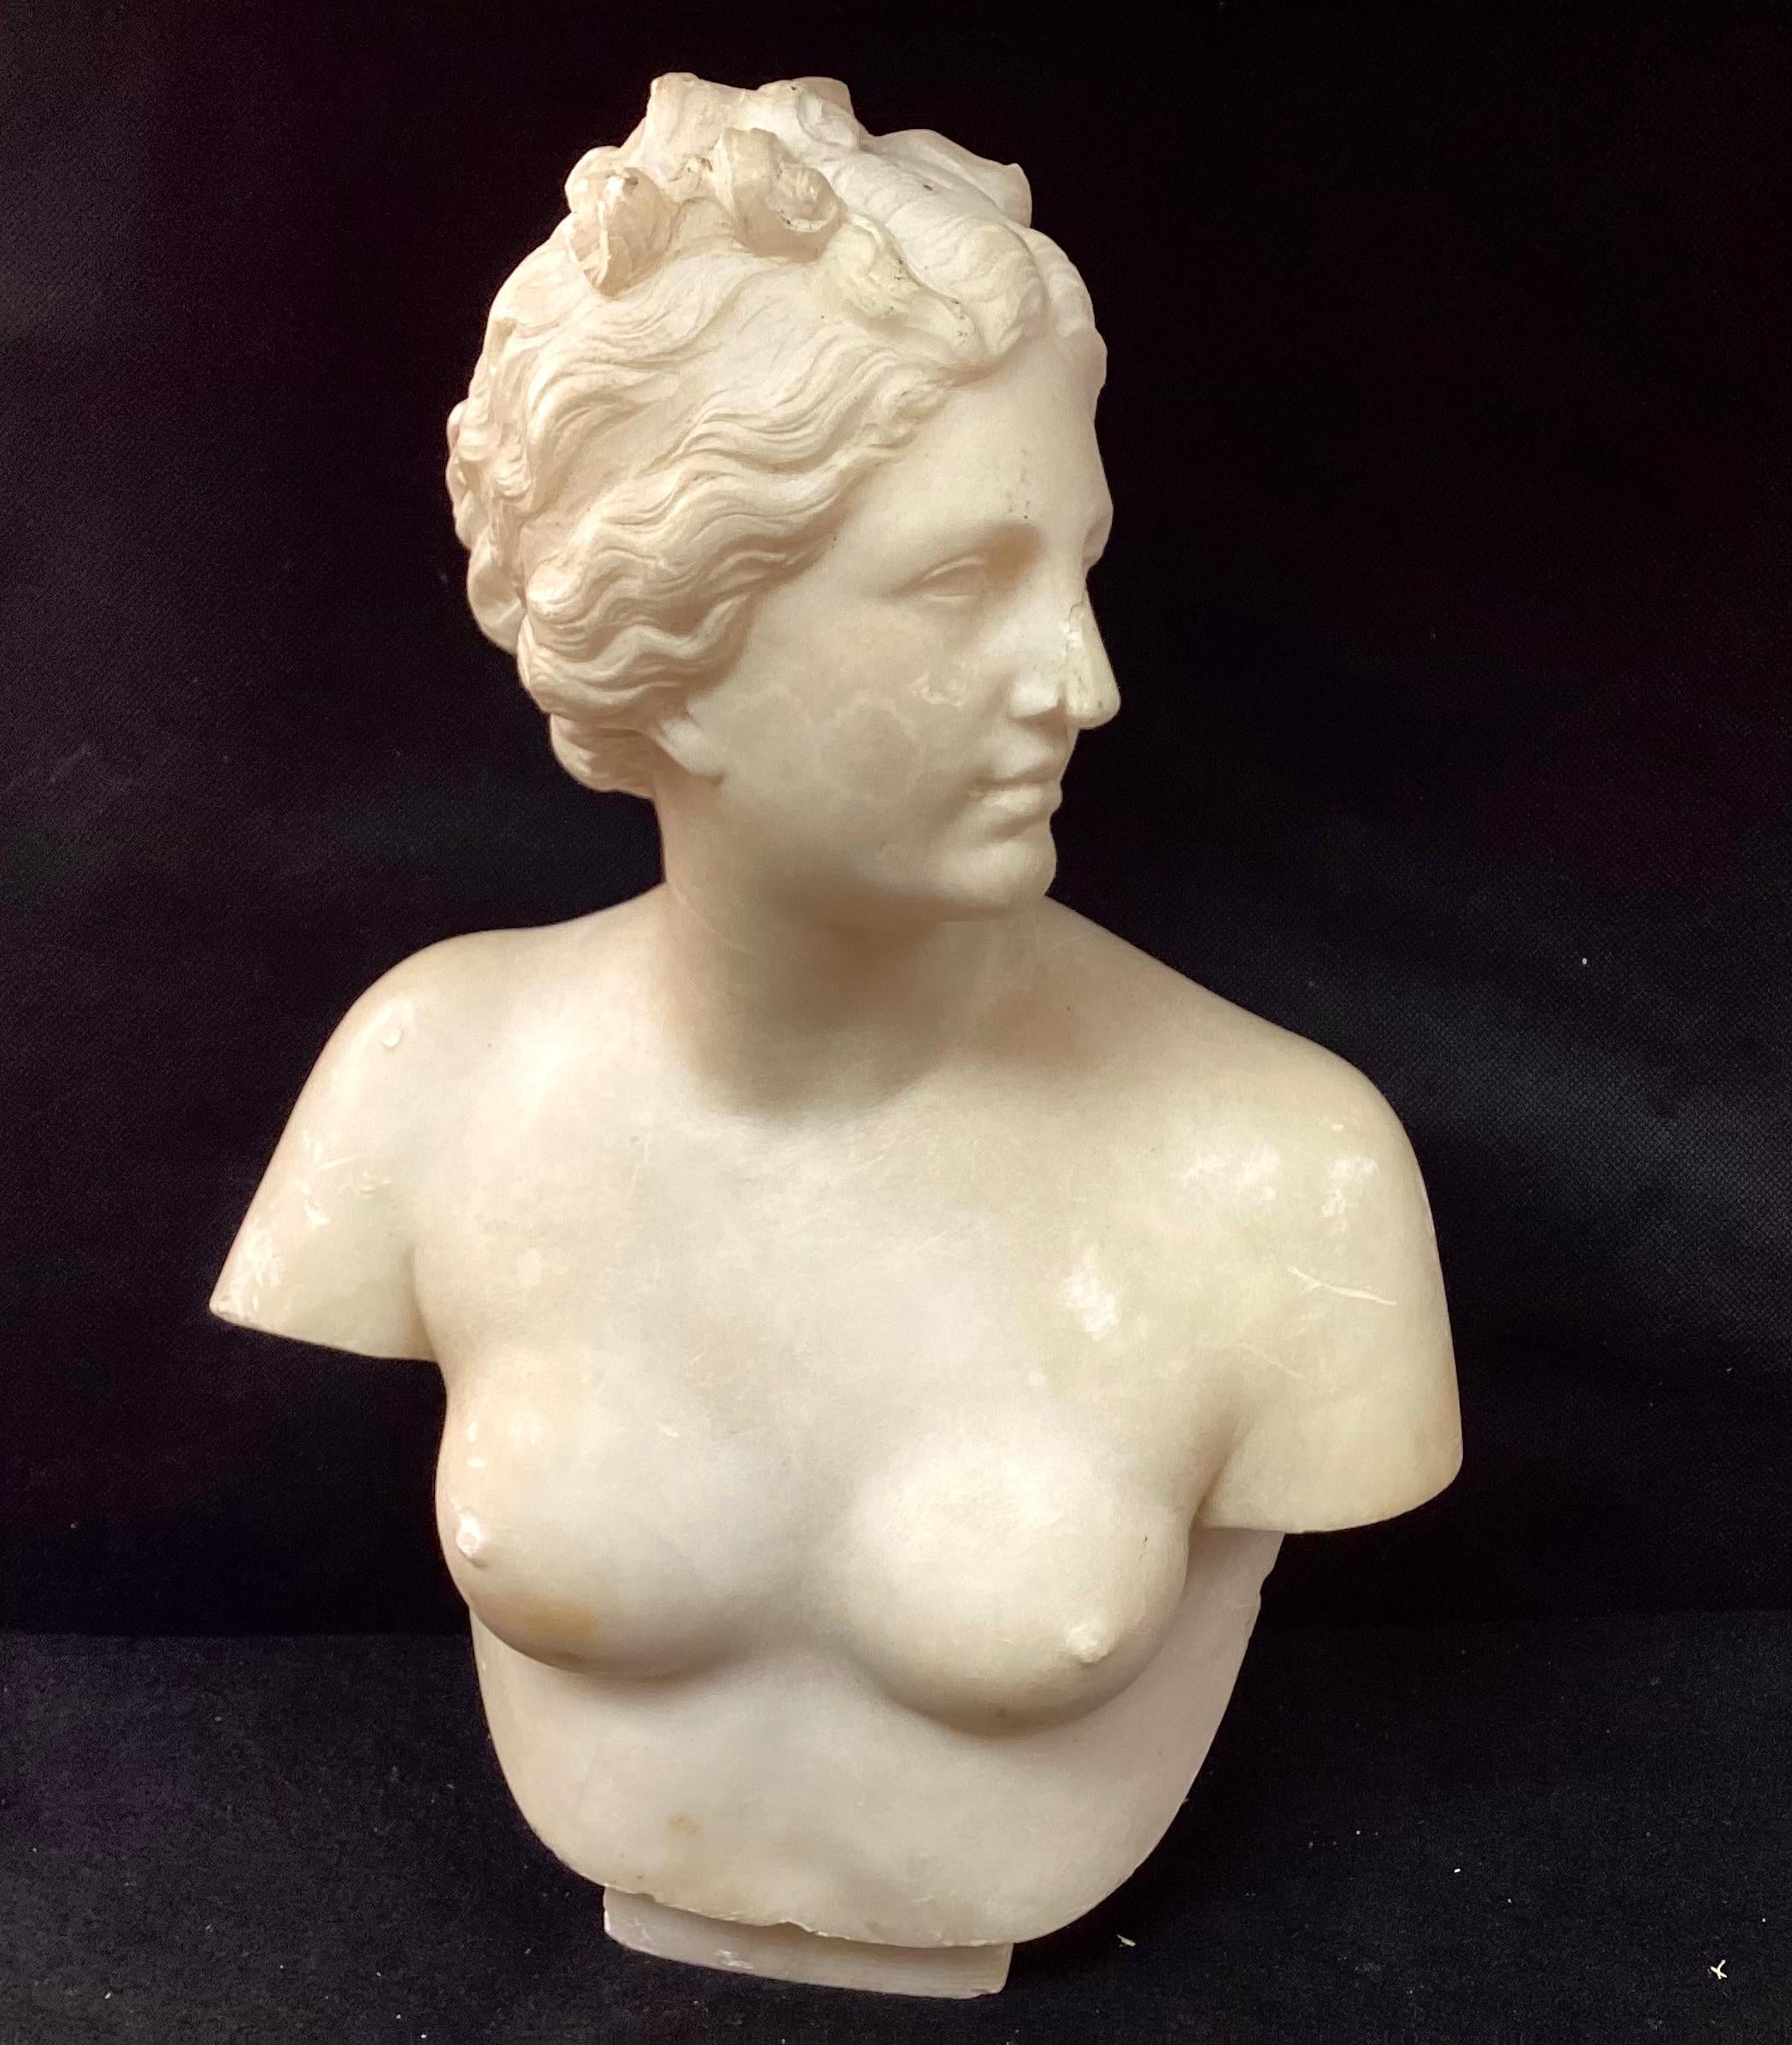 19th century Italian neoclassical marble bust of female, possibly Aphrodite symbolizing the timeless ideals of beauty, love, and desire. Beautifully carved with delicate facial features.